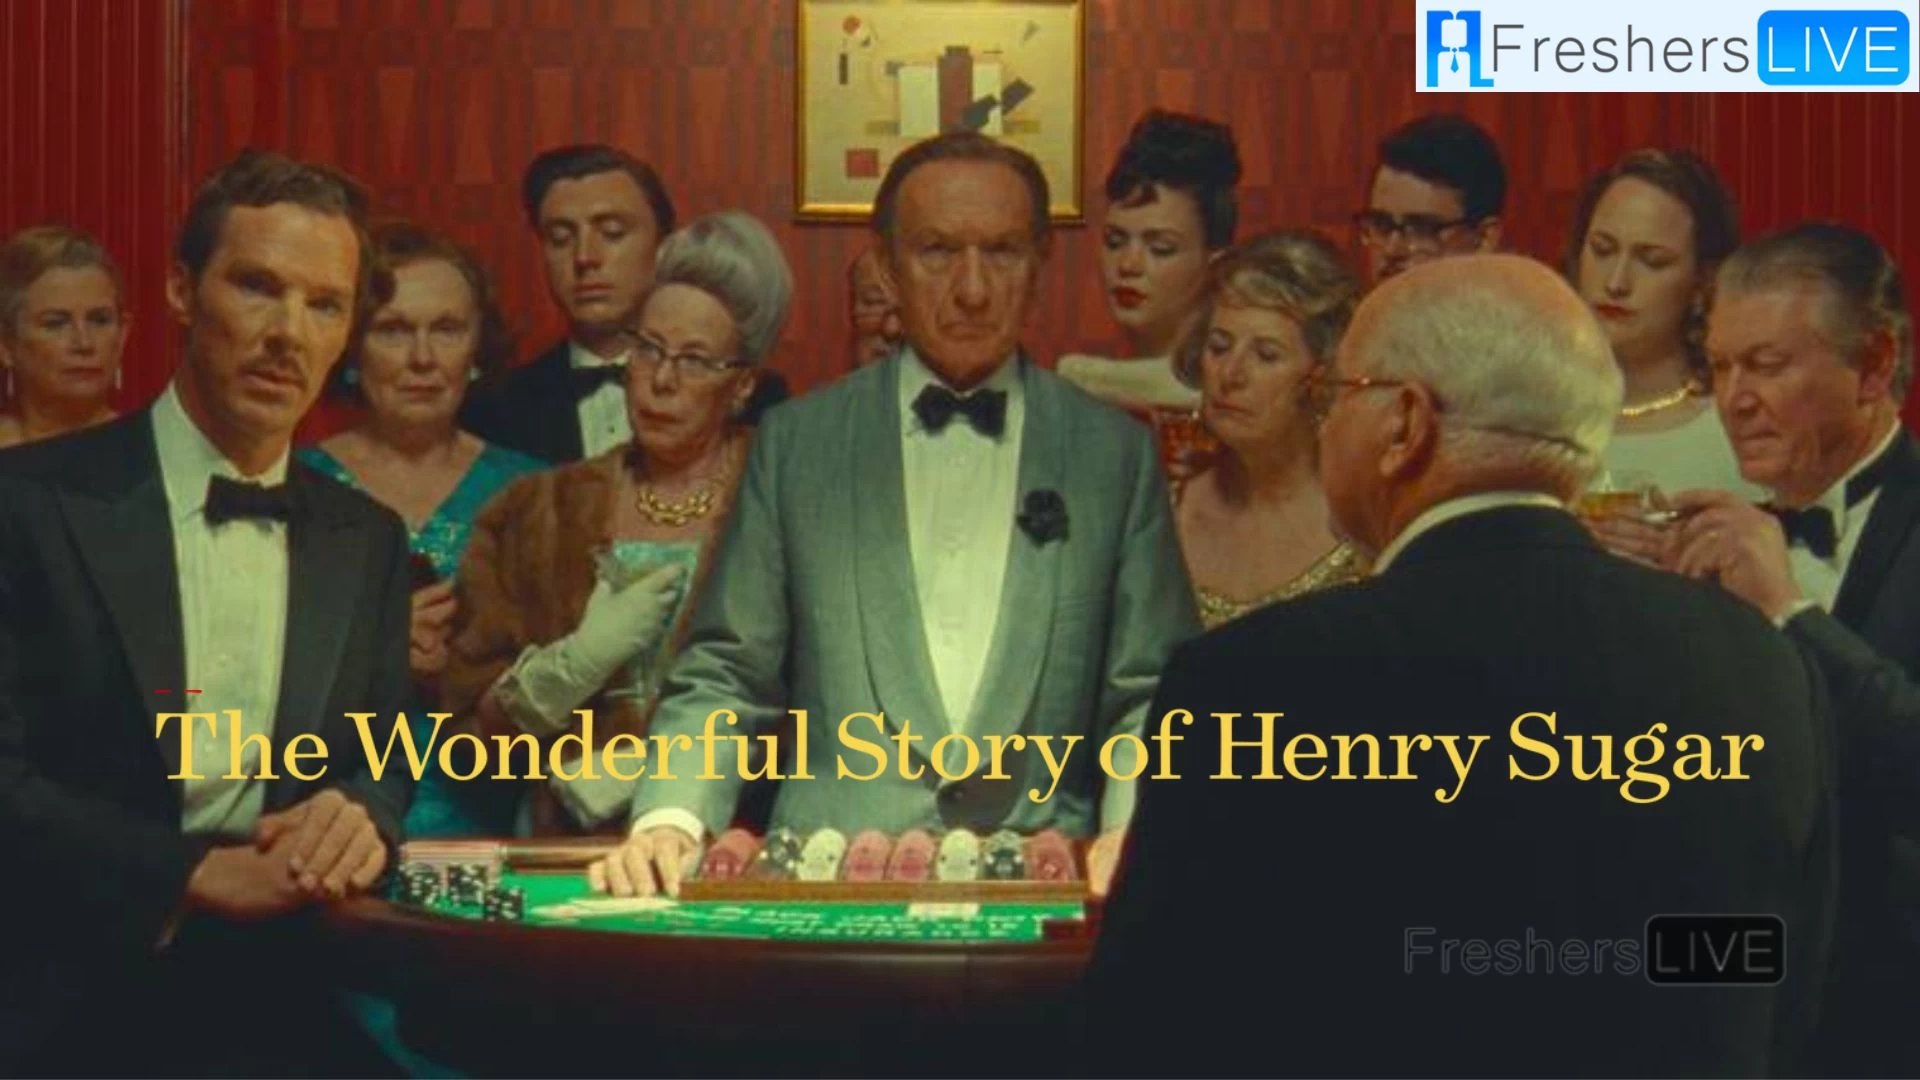 Is The Wonderful Story of Henry Sugar Based on True Story? Plot, Release Date and Trailer